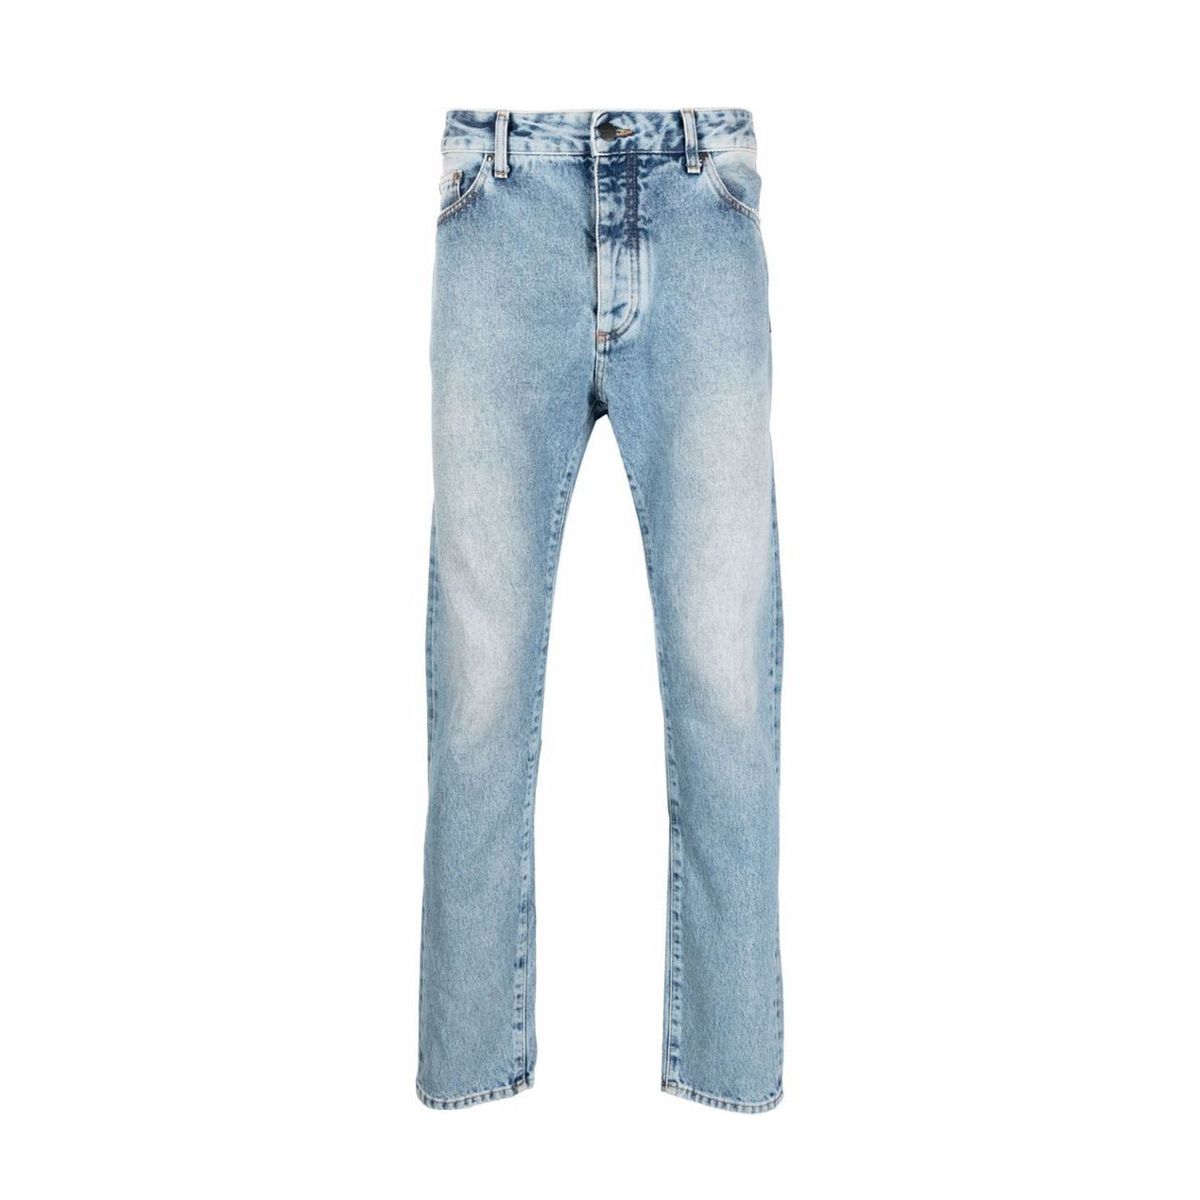 Faded Logo Print Jeans